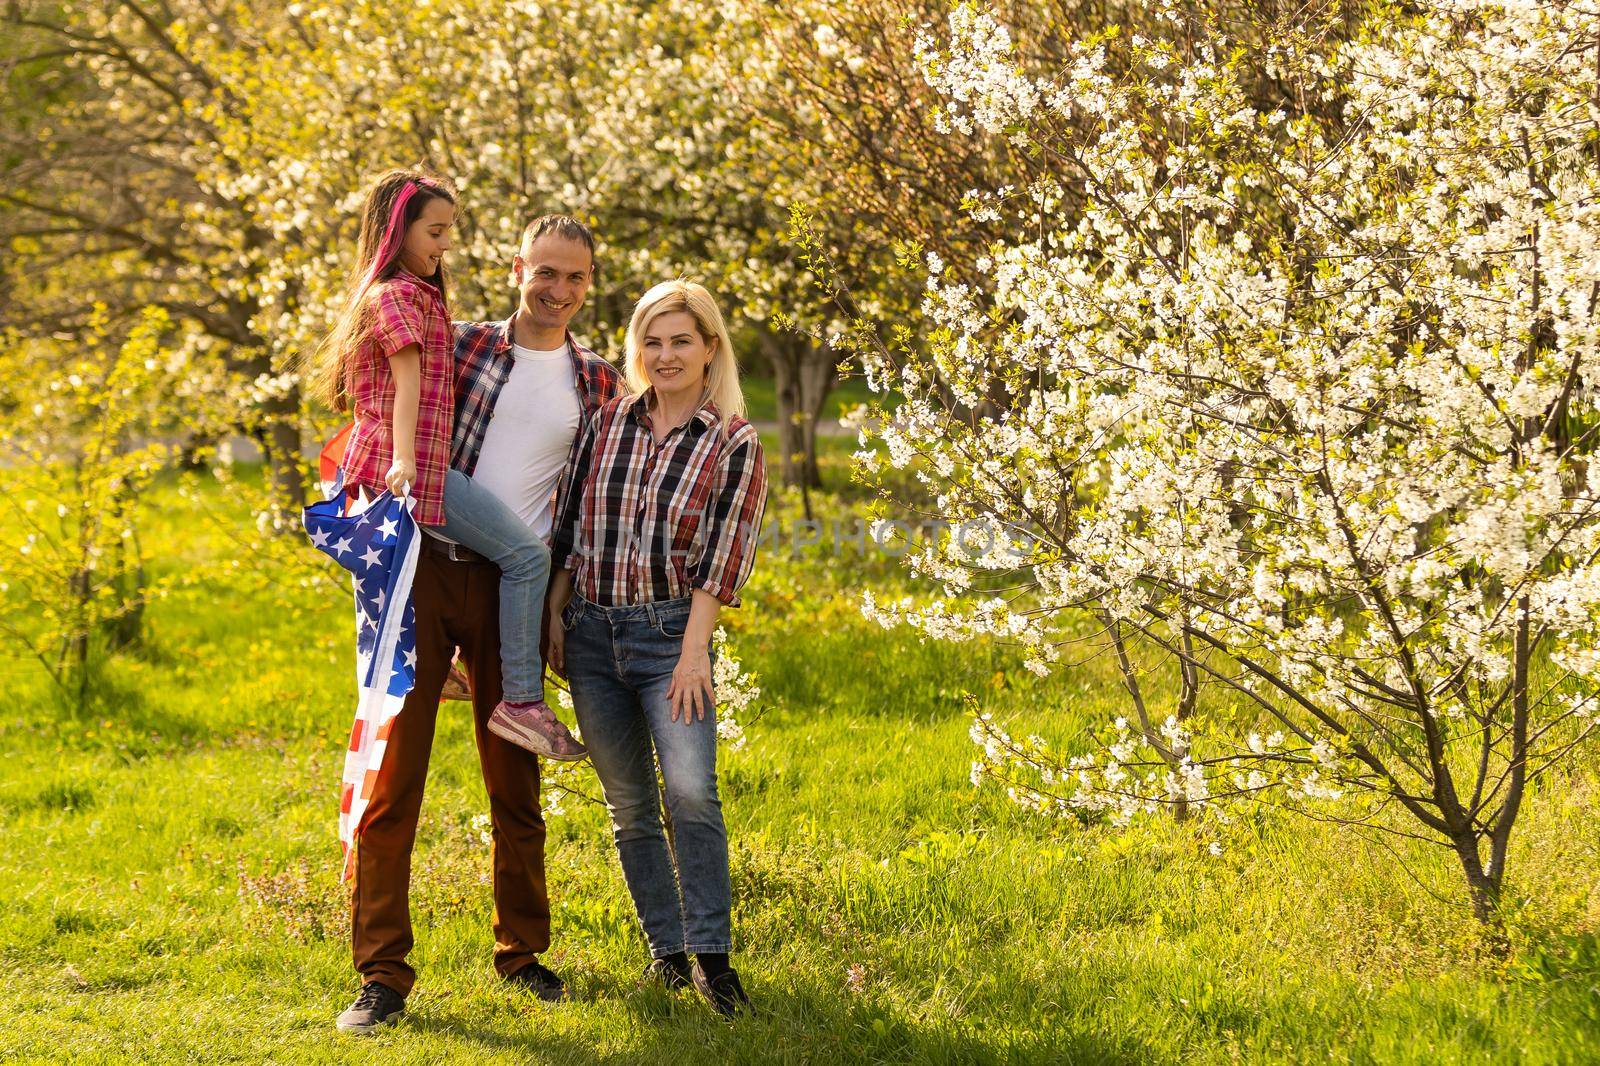 portrait of beautiful modern american family with USA flag outdoors. by Andelov13